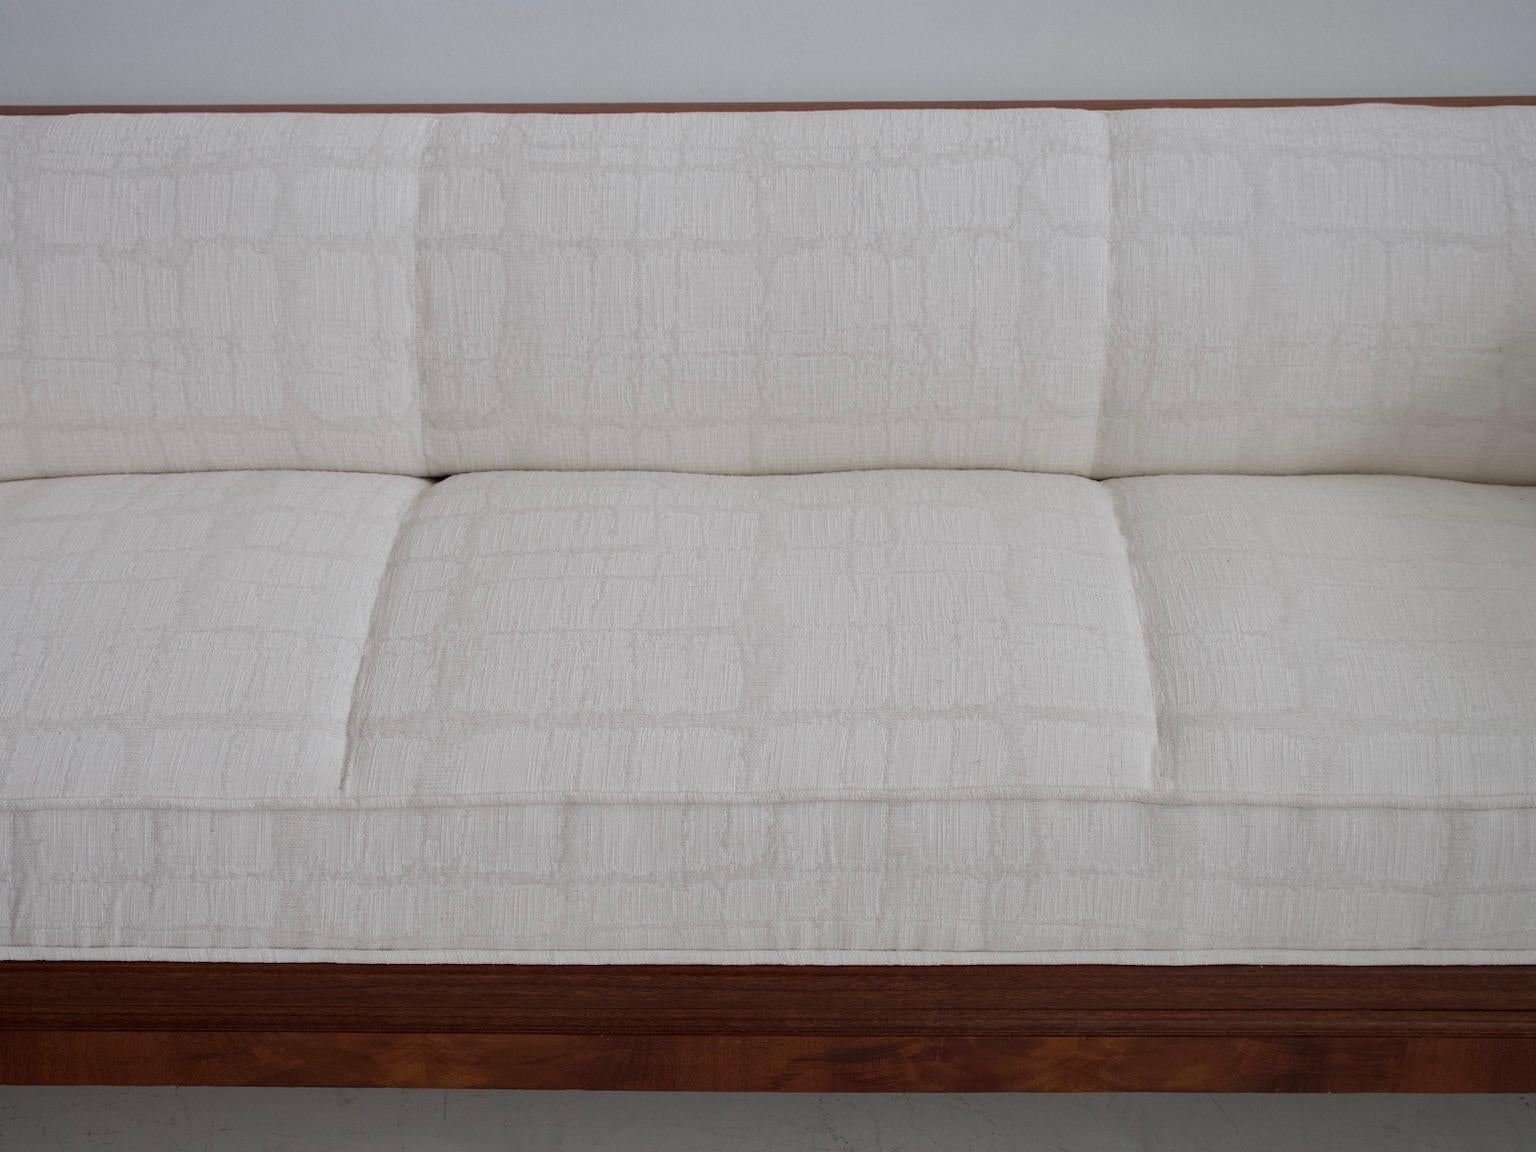 deconstructed couch